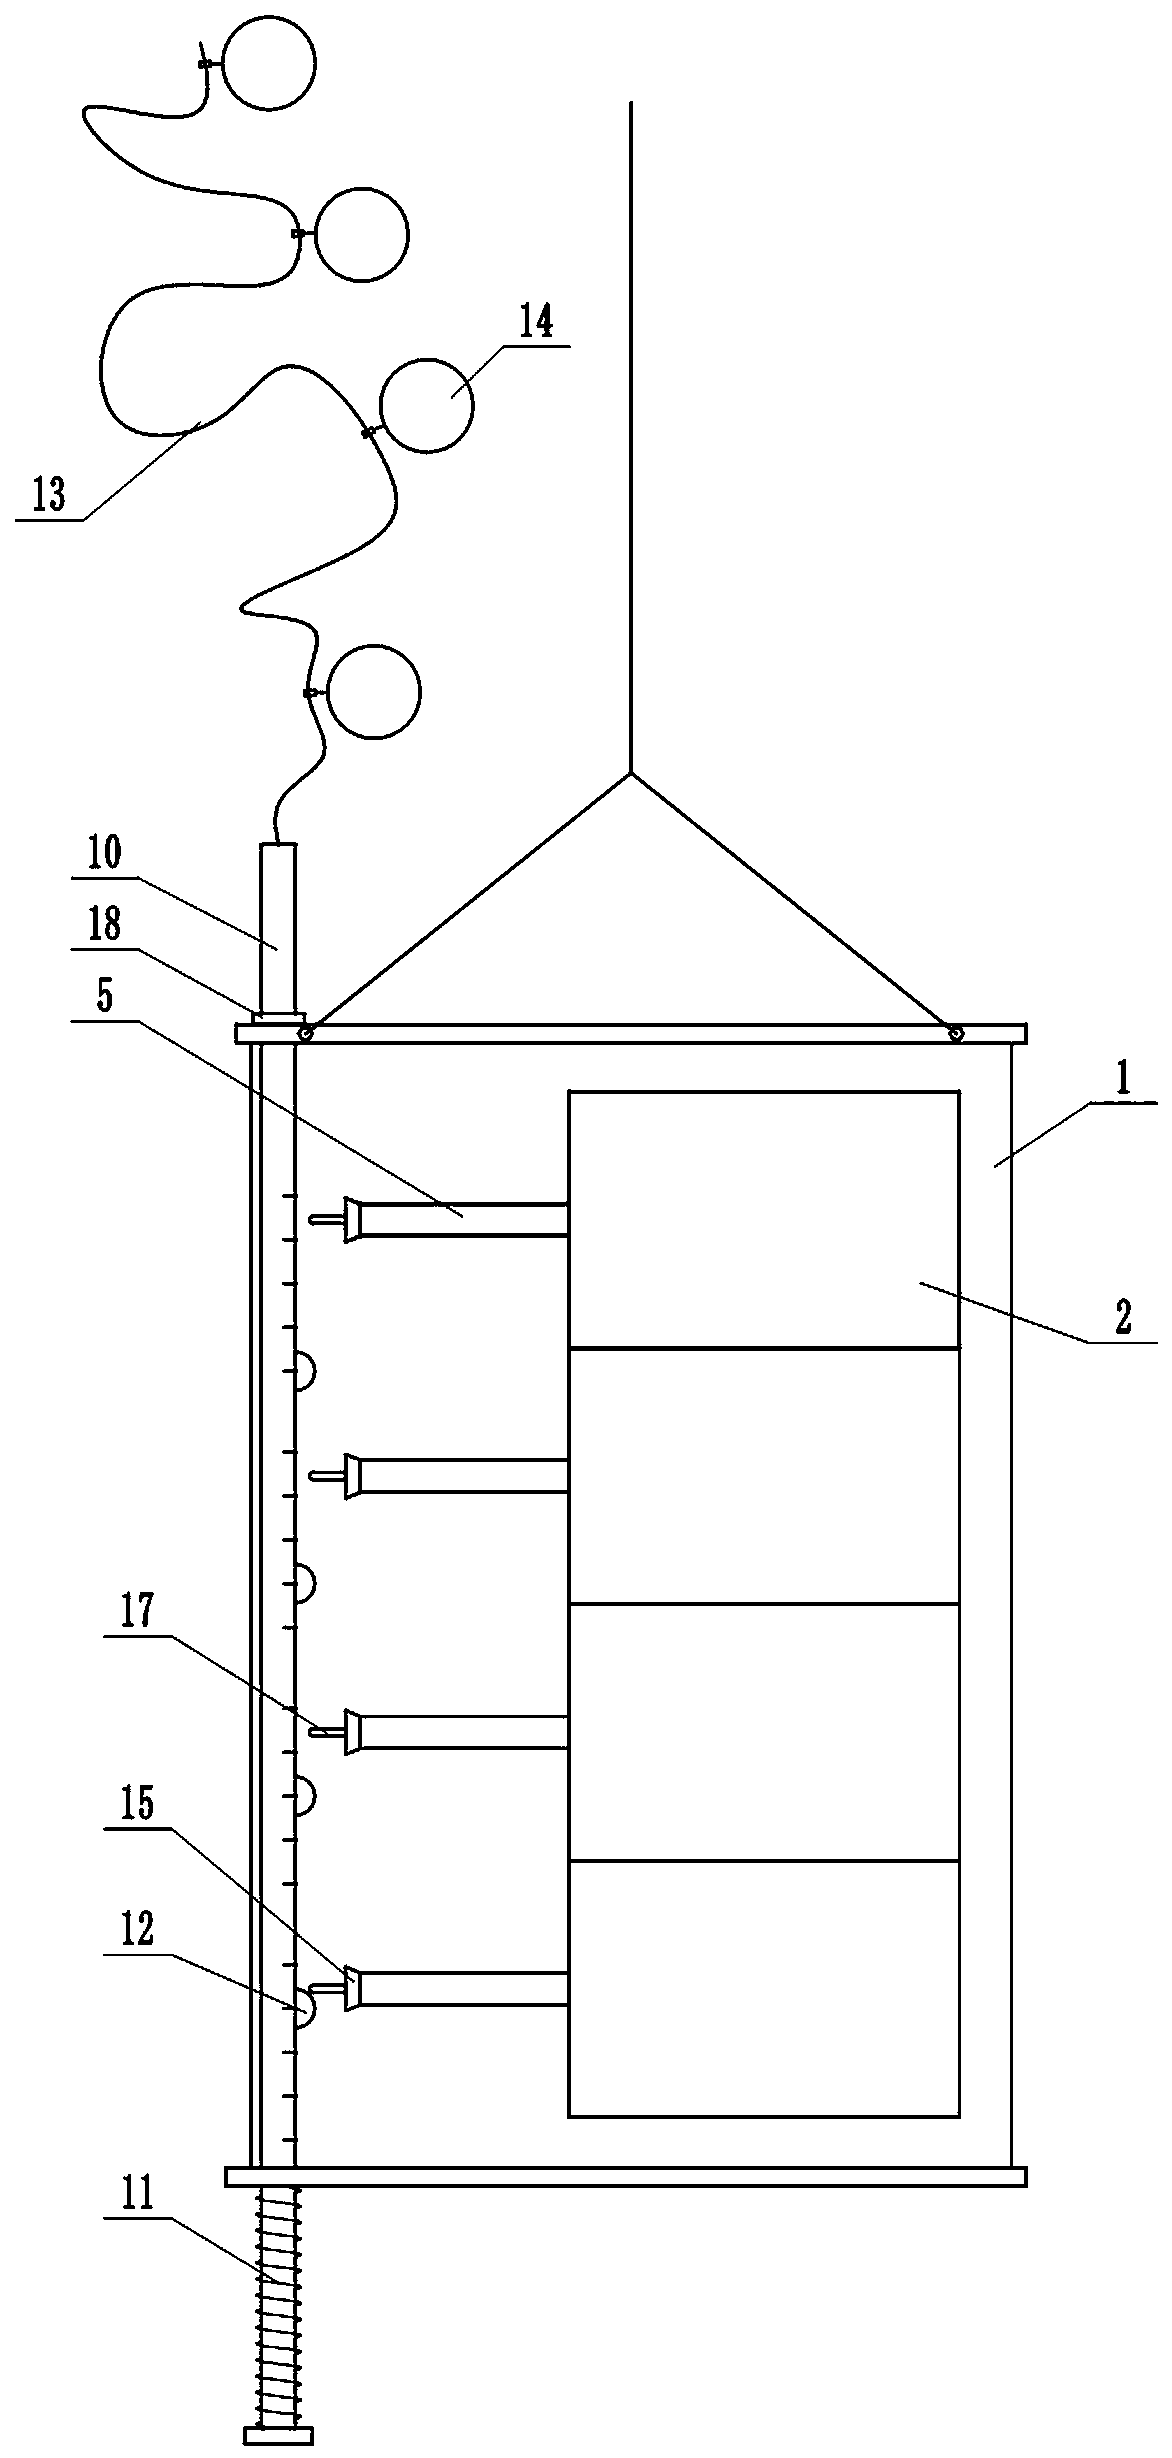 Stratified sampling device for water at any depth